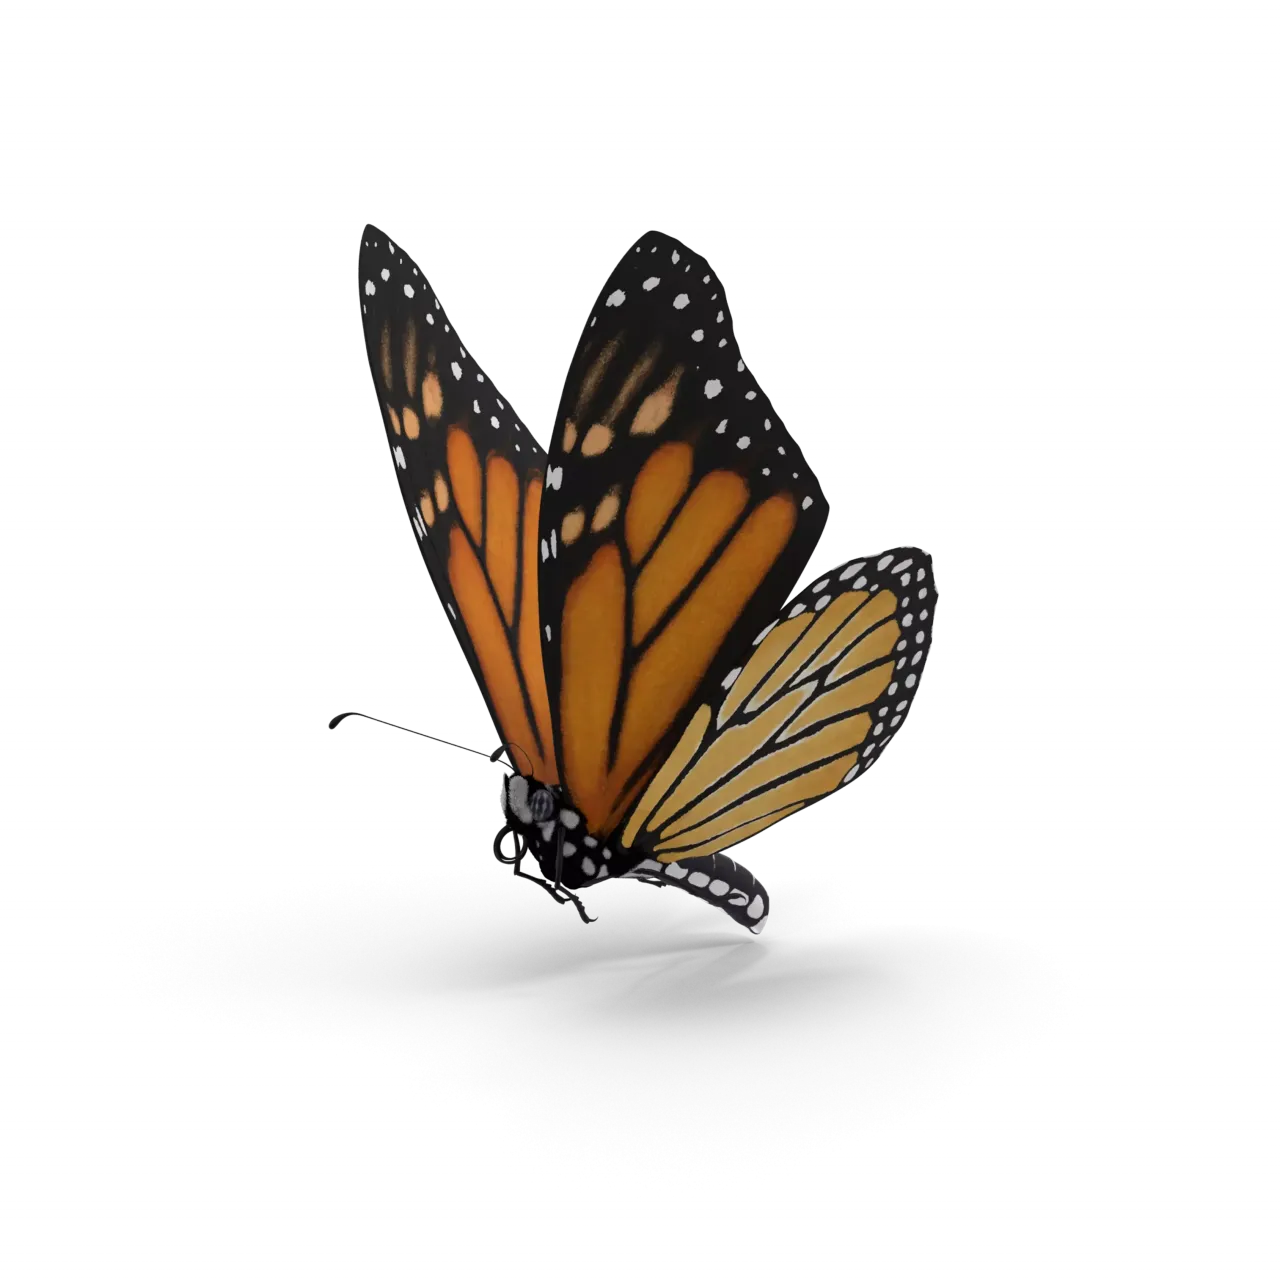 A butterfly as the Agile quickcard header image